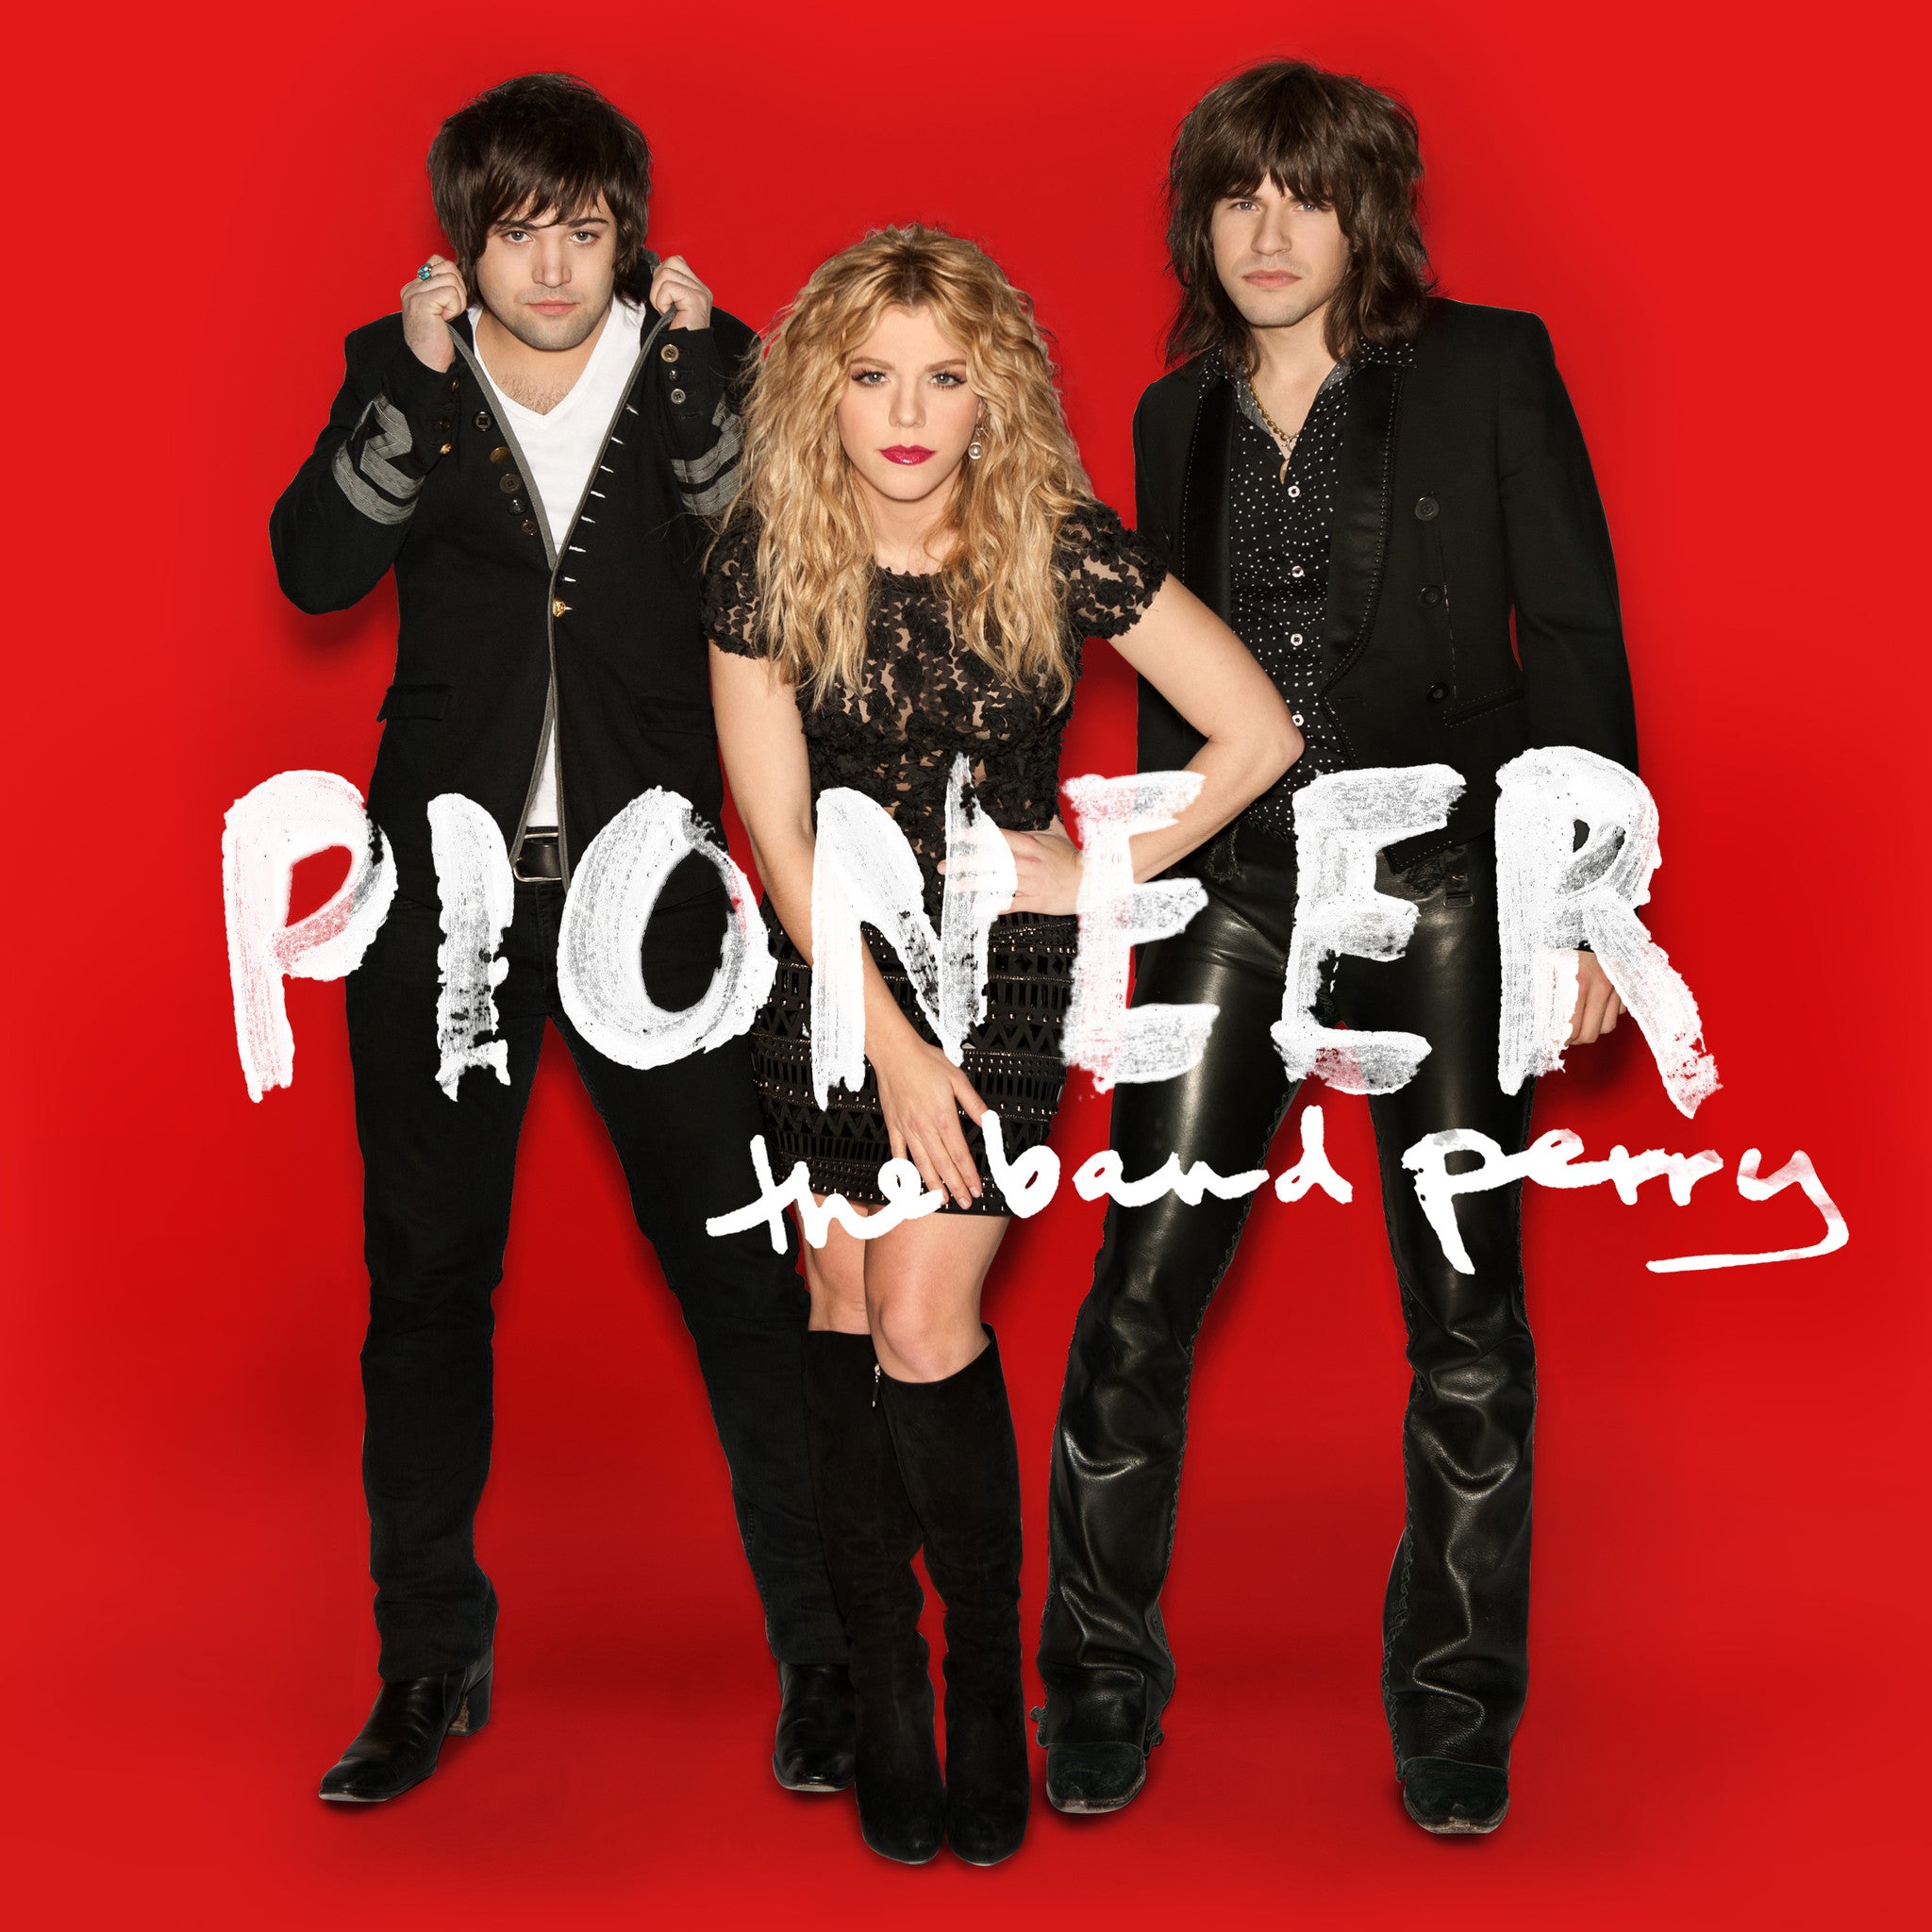 The Band Perry - Pioneer - Vinyl | The Band Perry | Big Machine ...